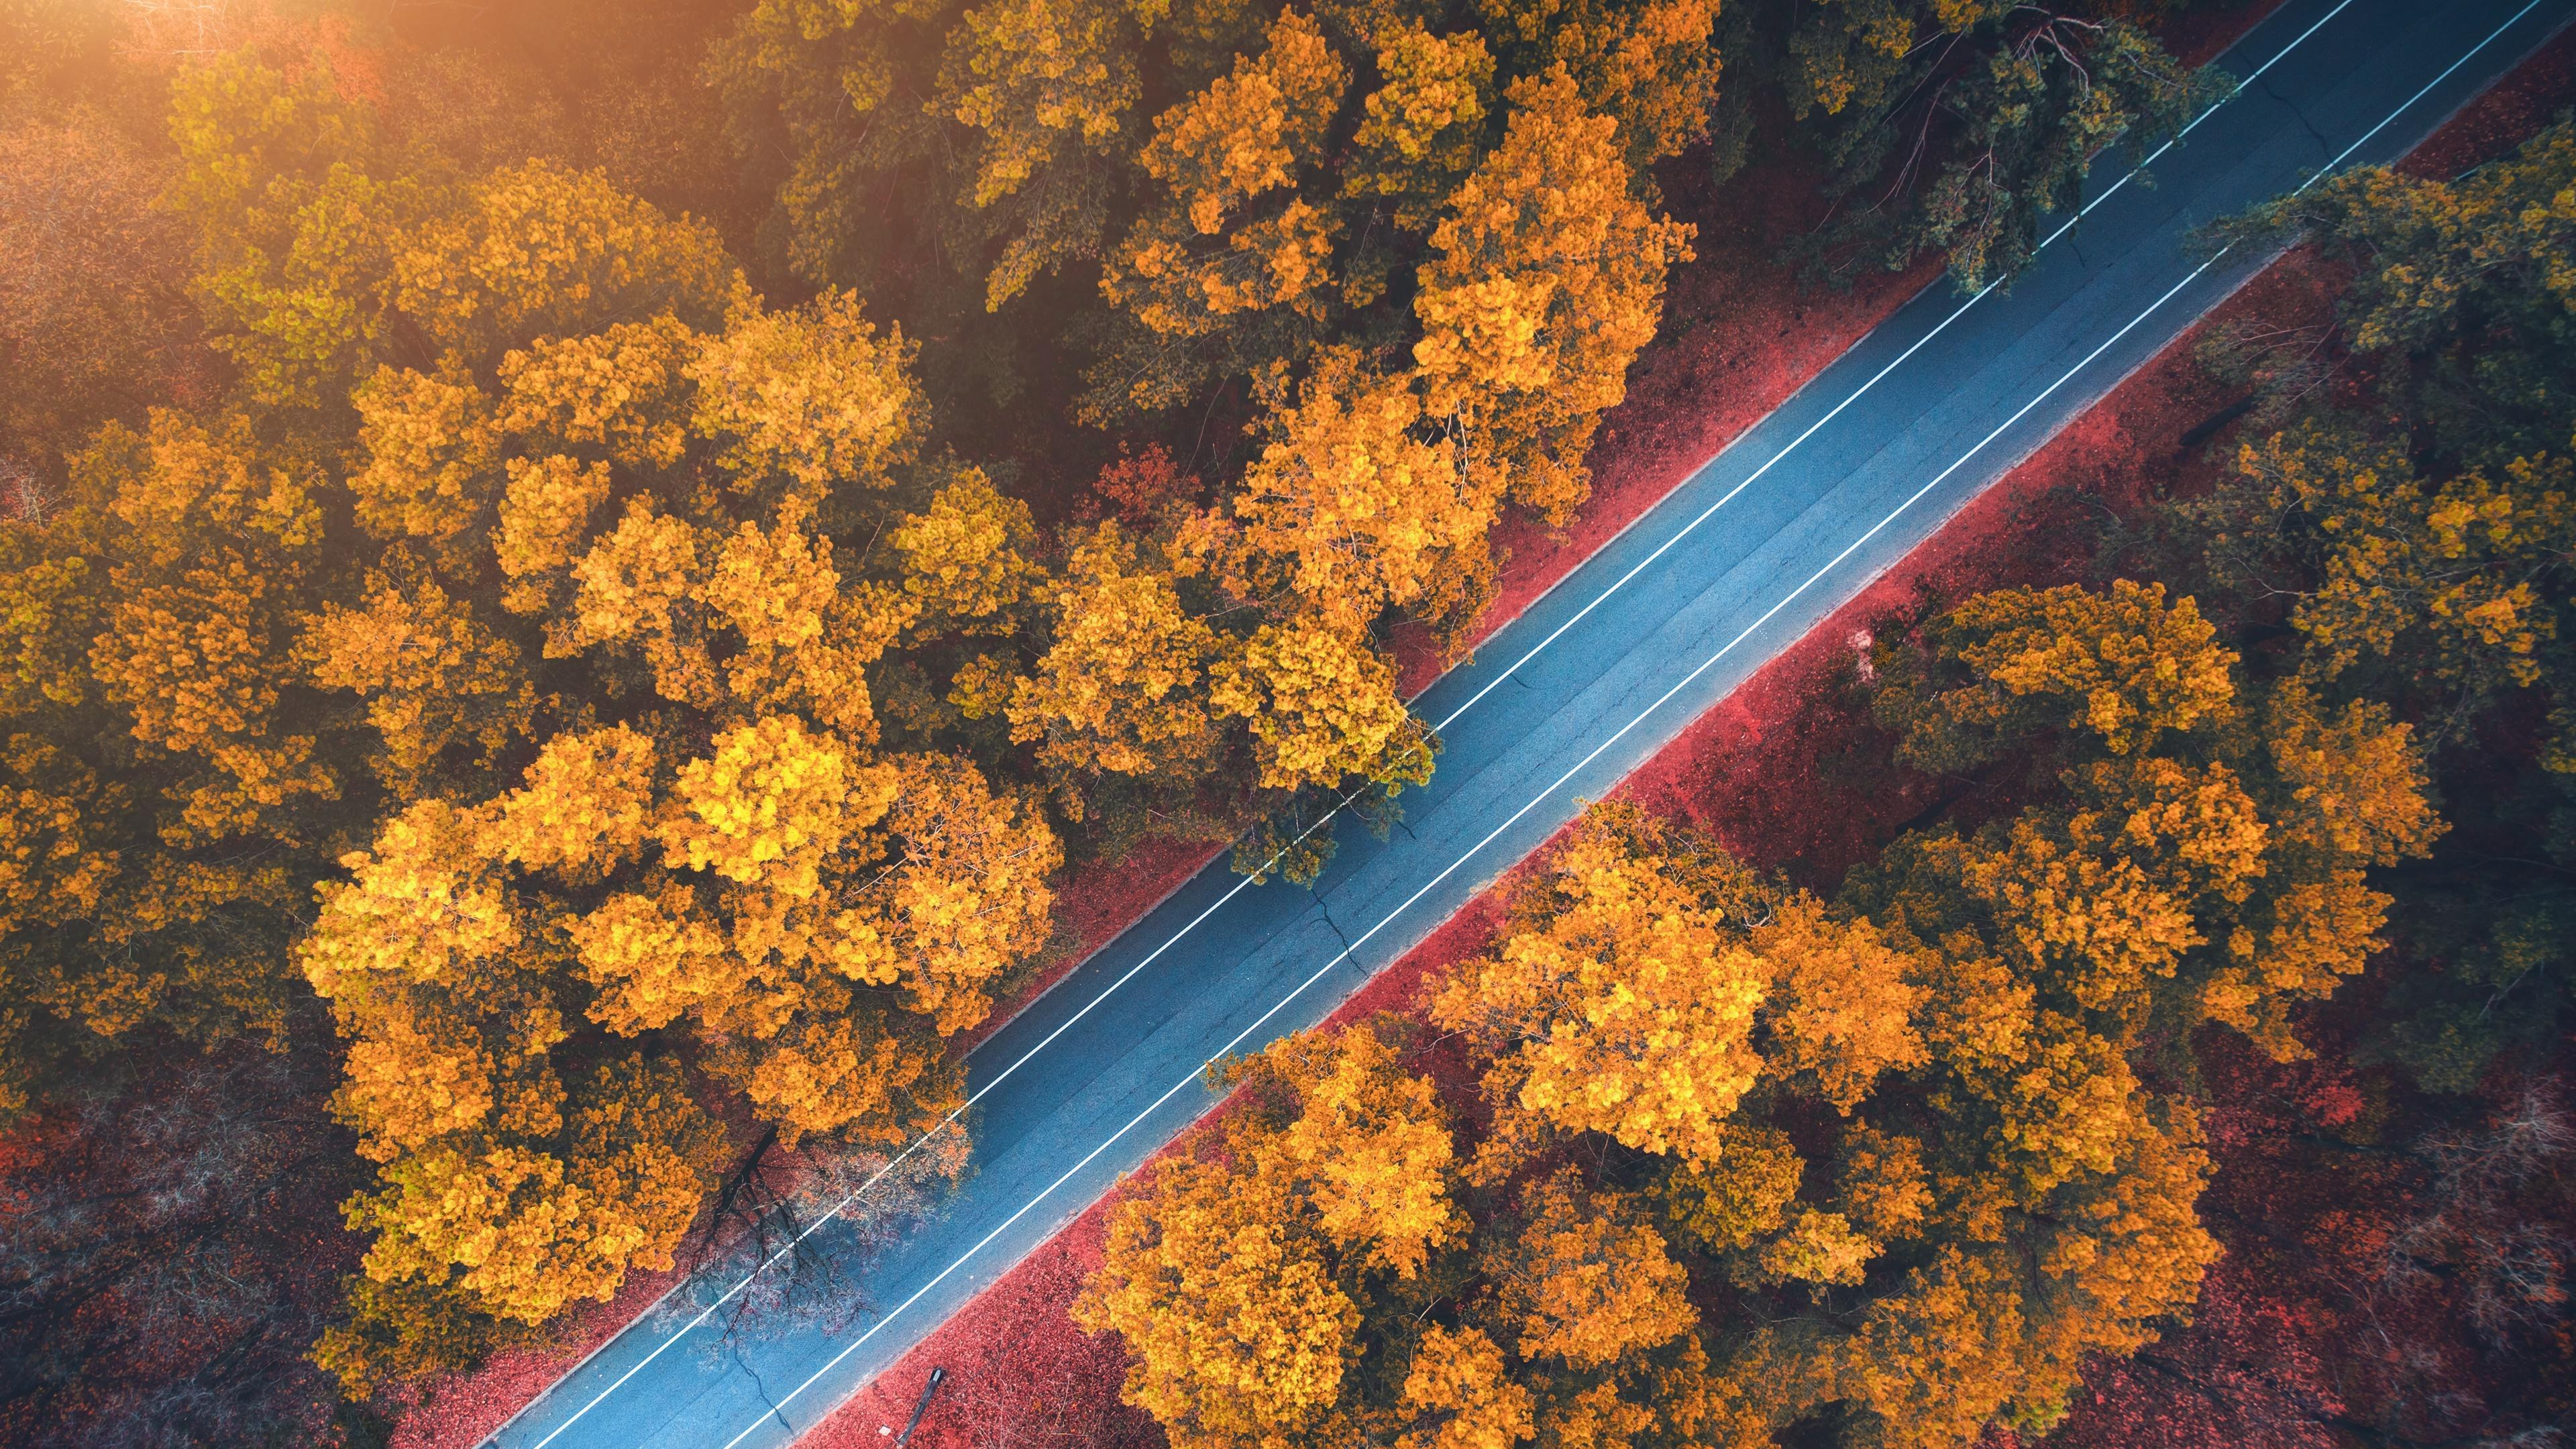 HD wallpaper, Trees, Scenery, 4K, Forest, Road, Autumn, Nature